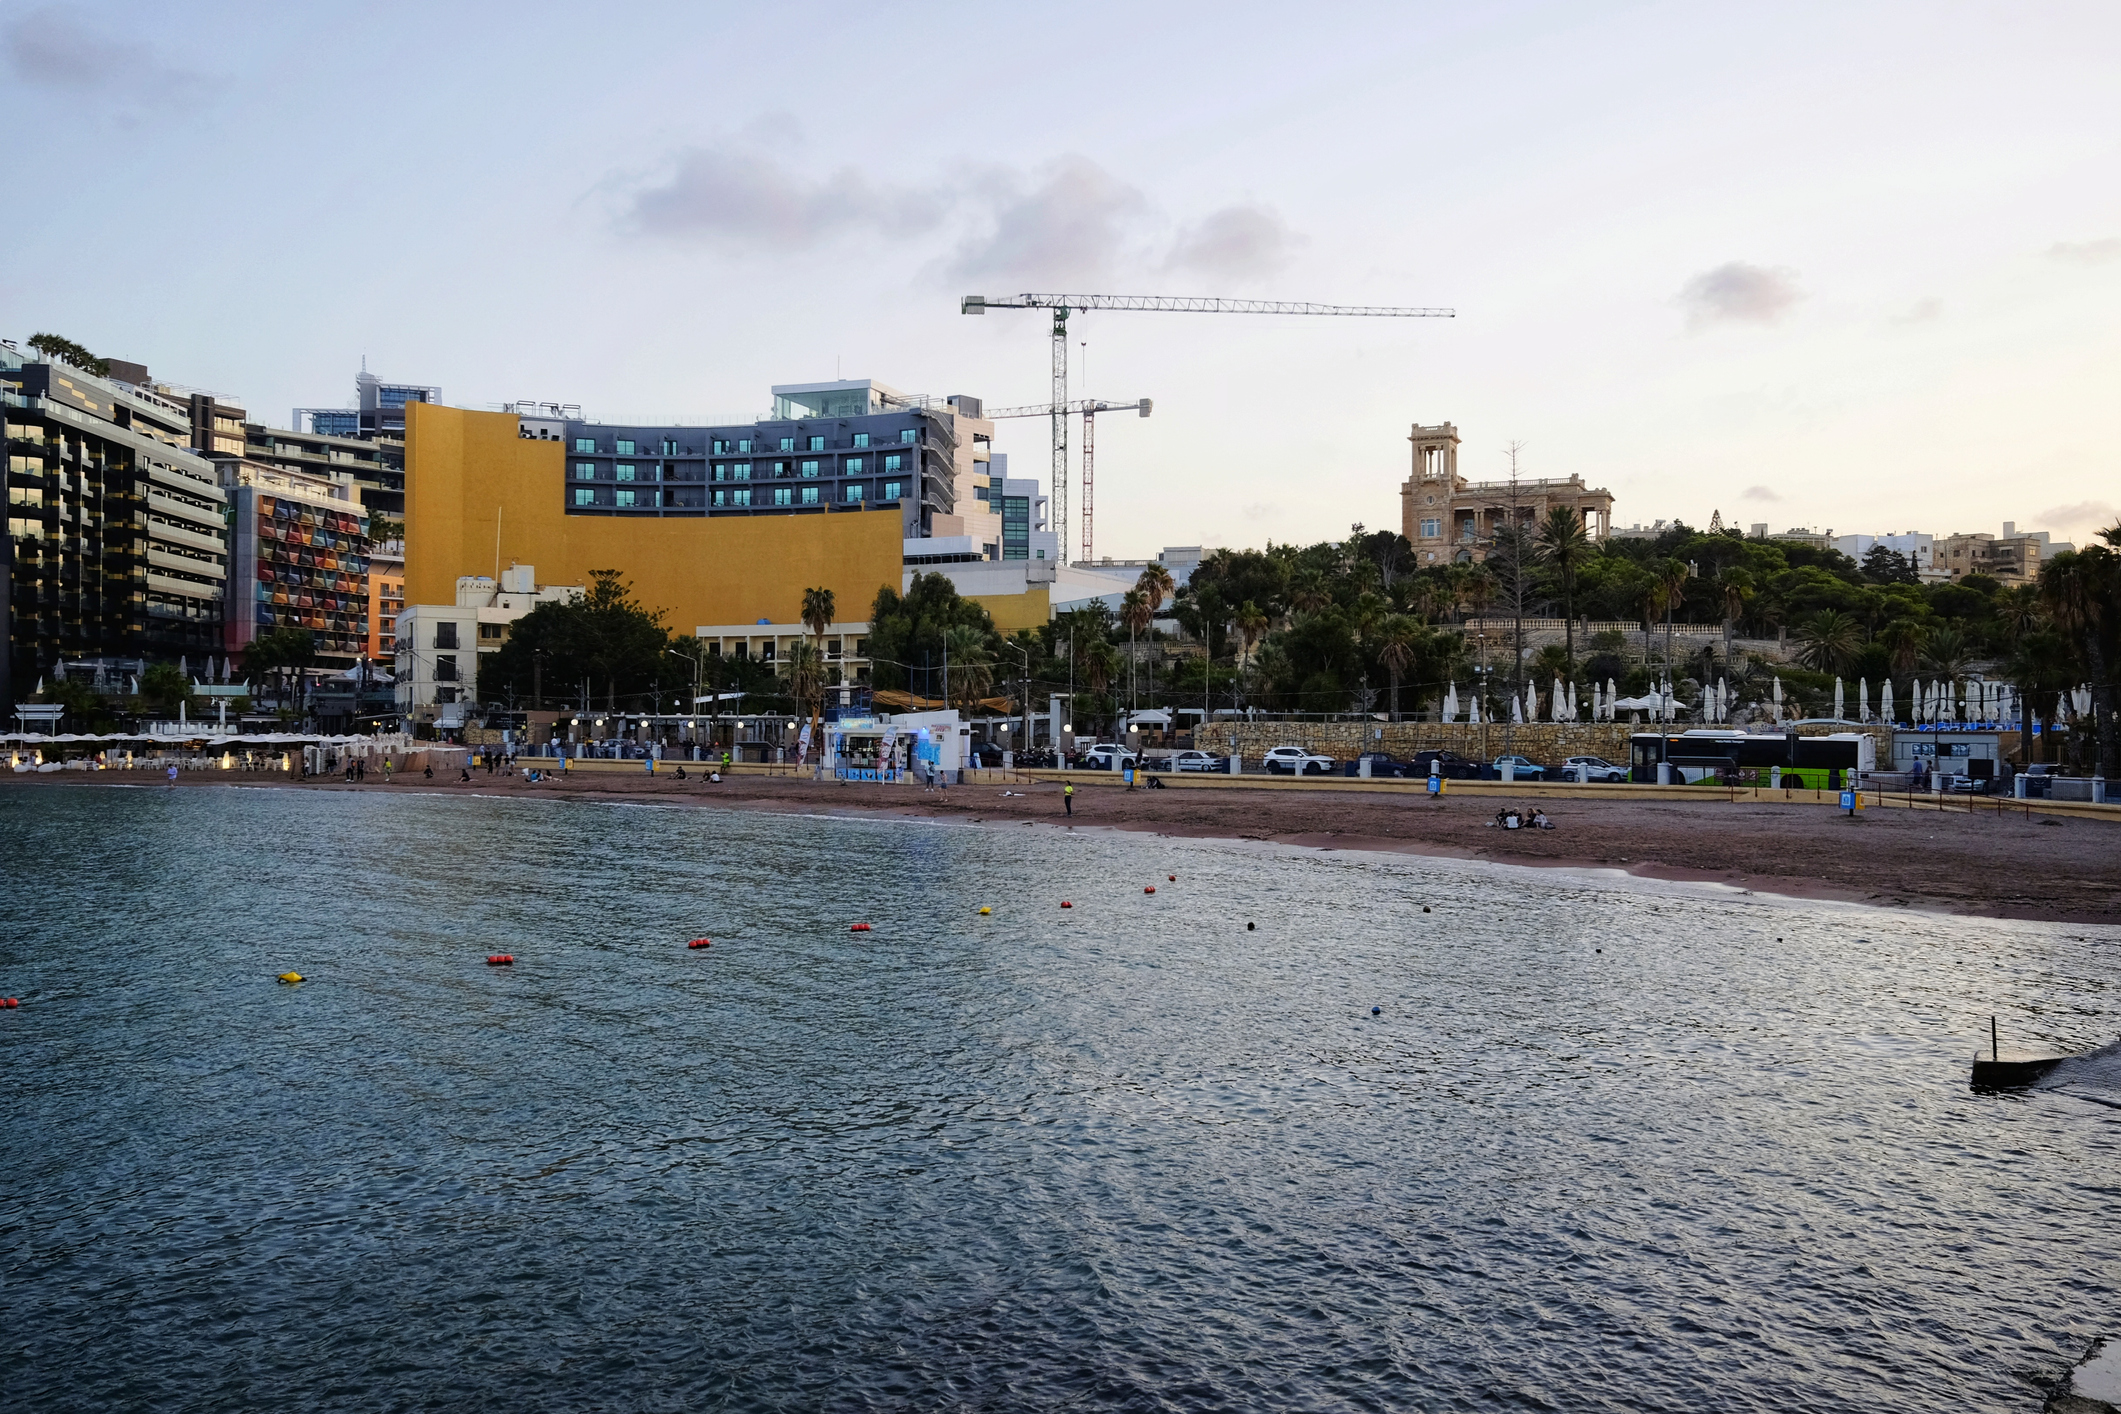 St George's Bay in Paceville, Malta